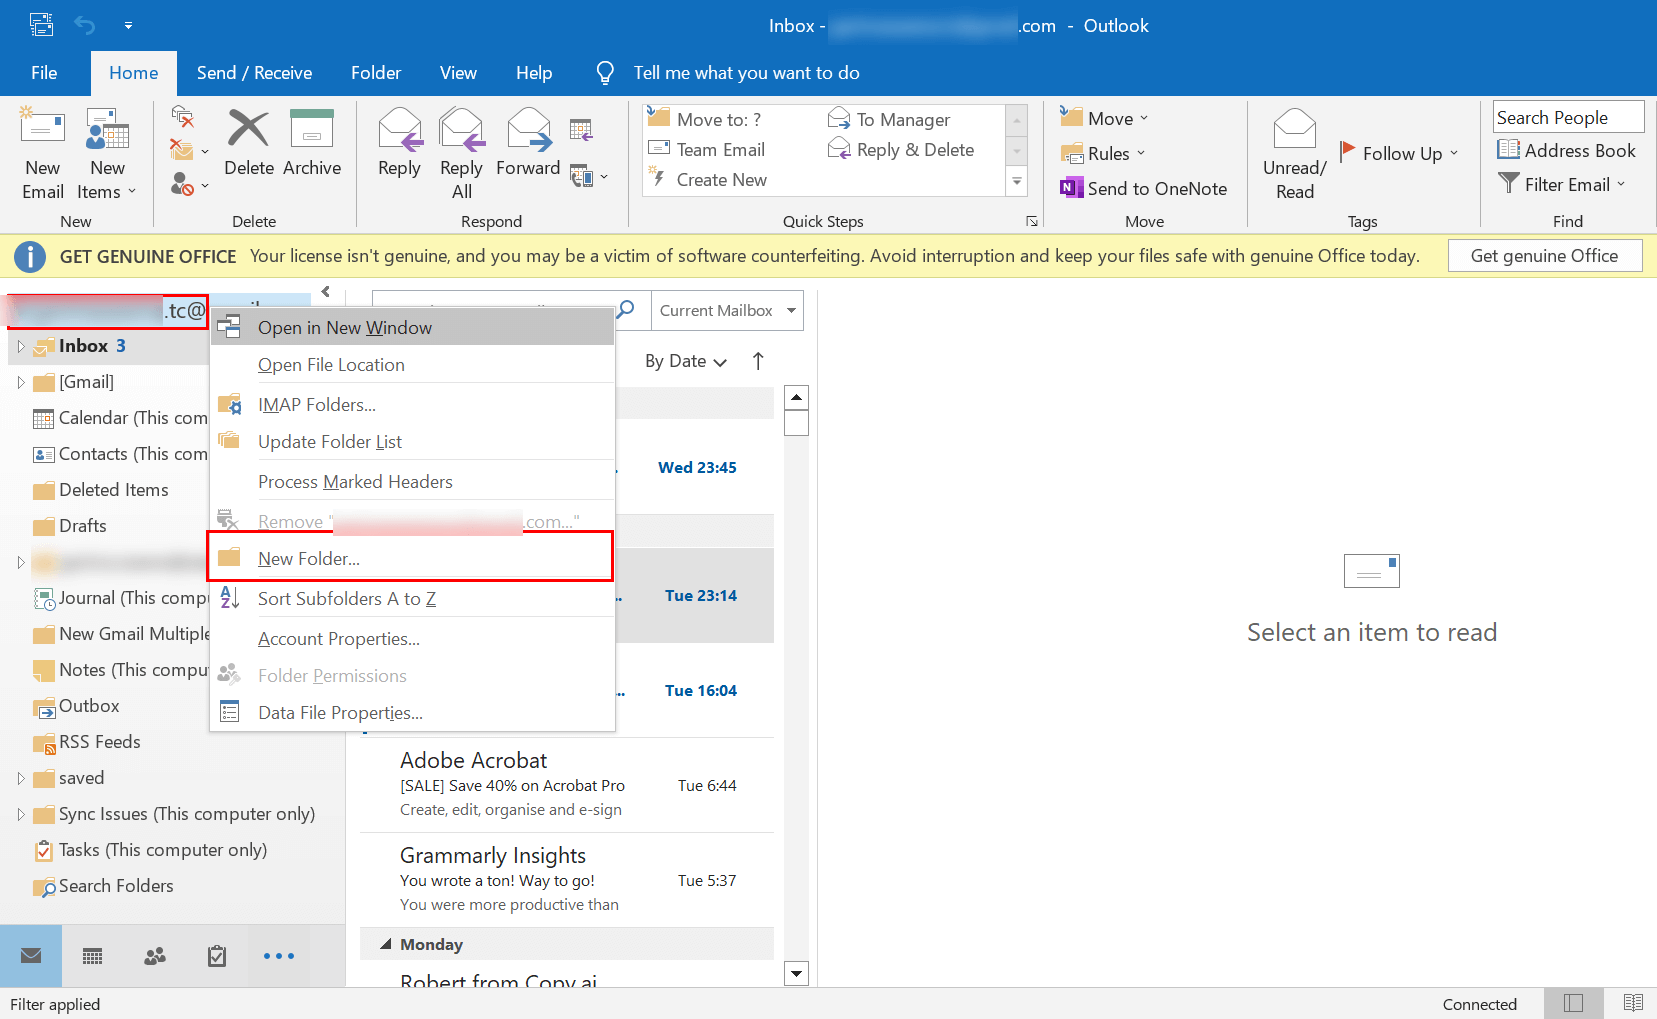 Migrate iCloud Email to Office 365